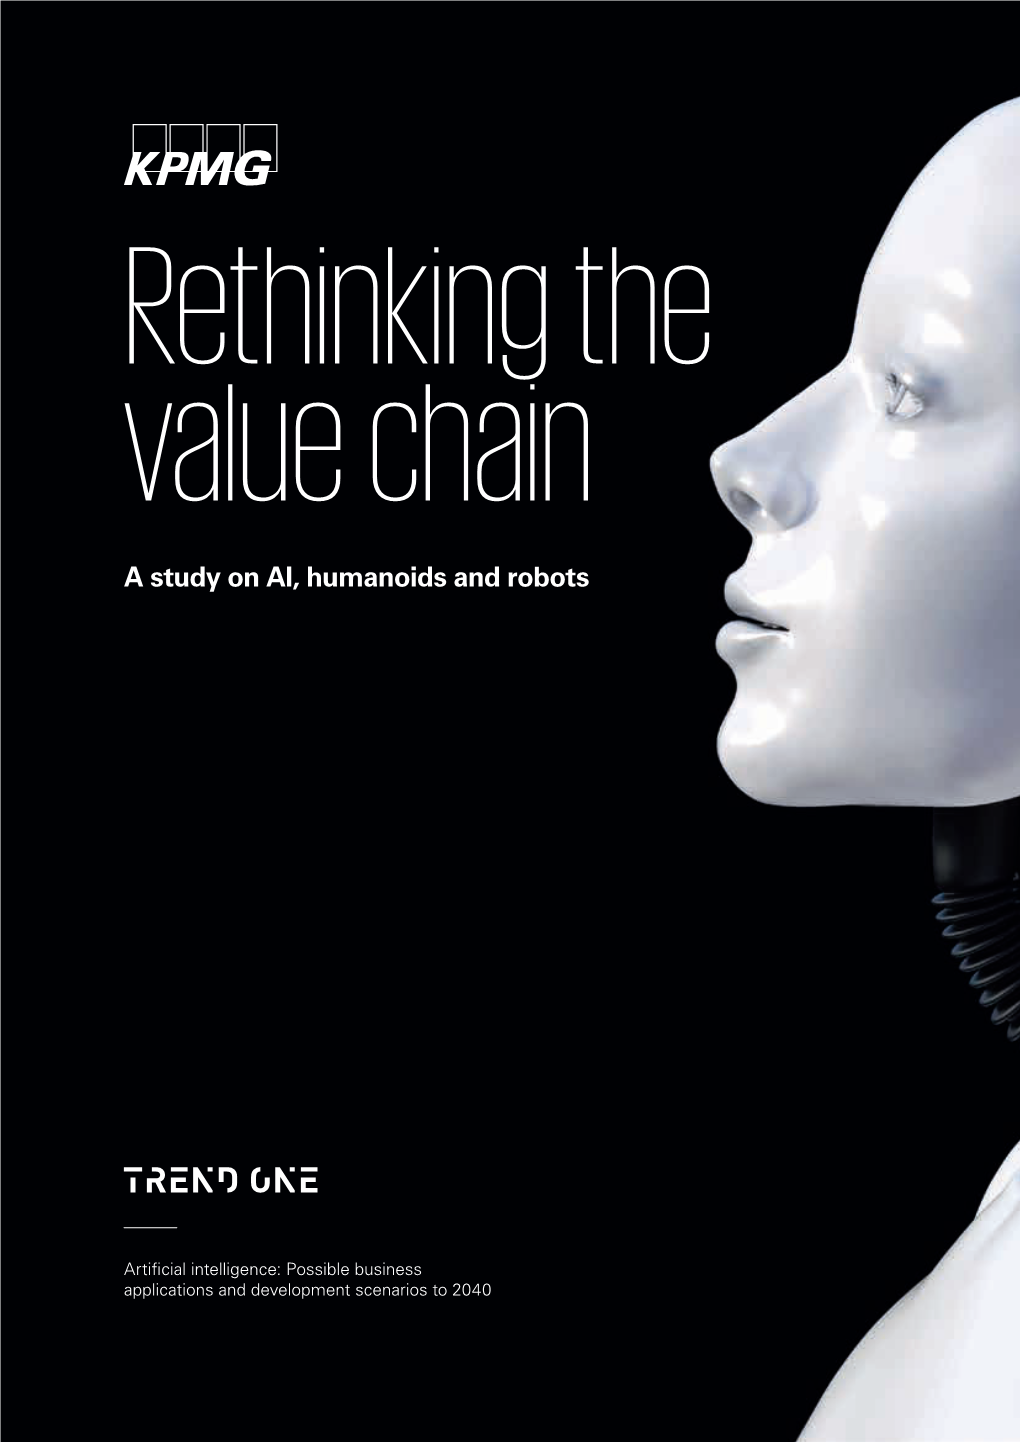 Rethinking the Value Chain